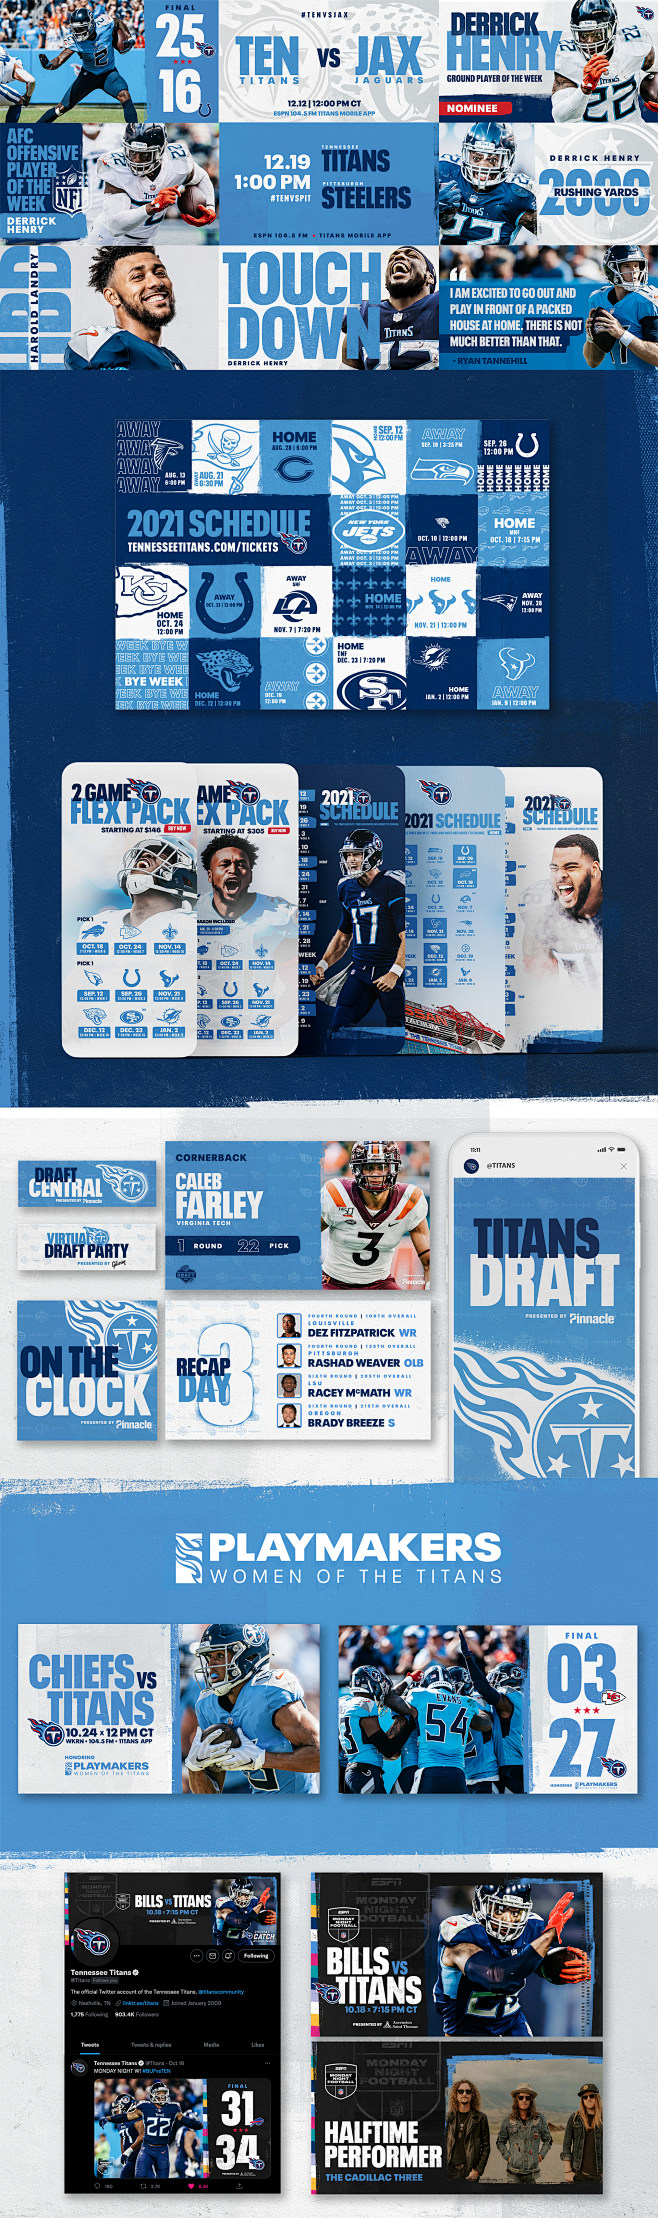 Tennessee Titans NFL...